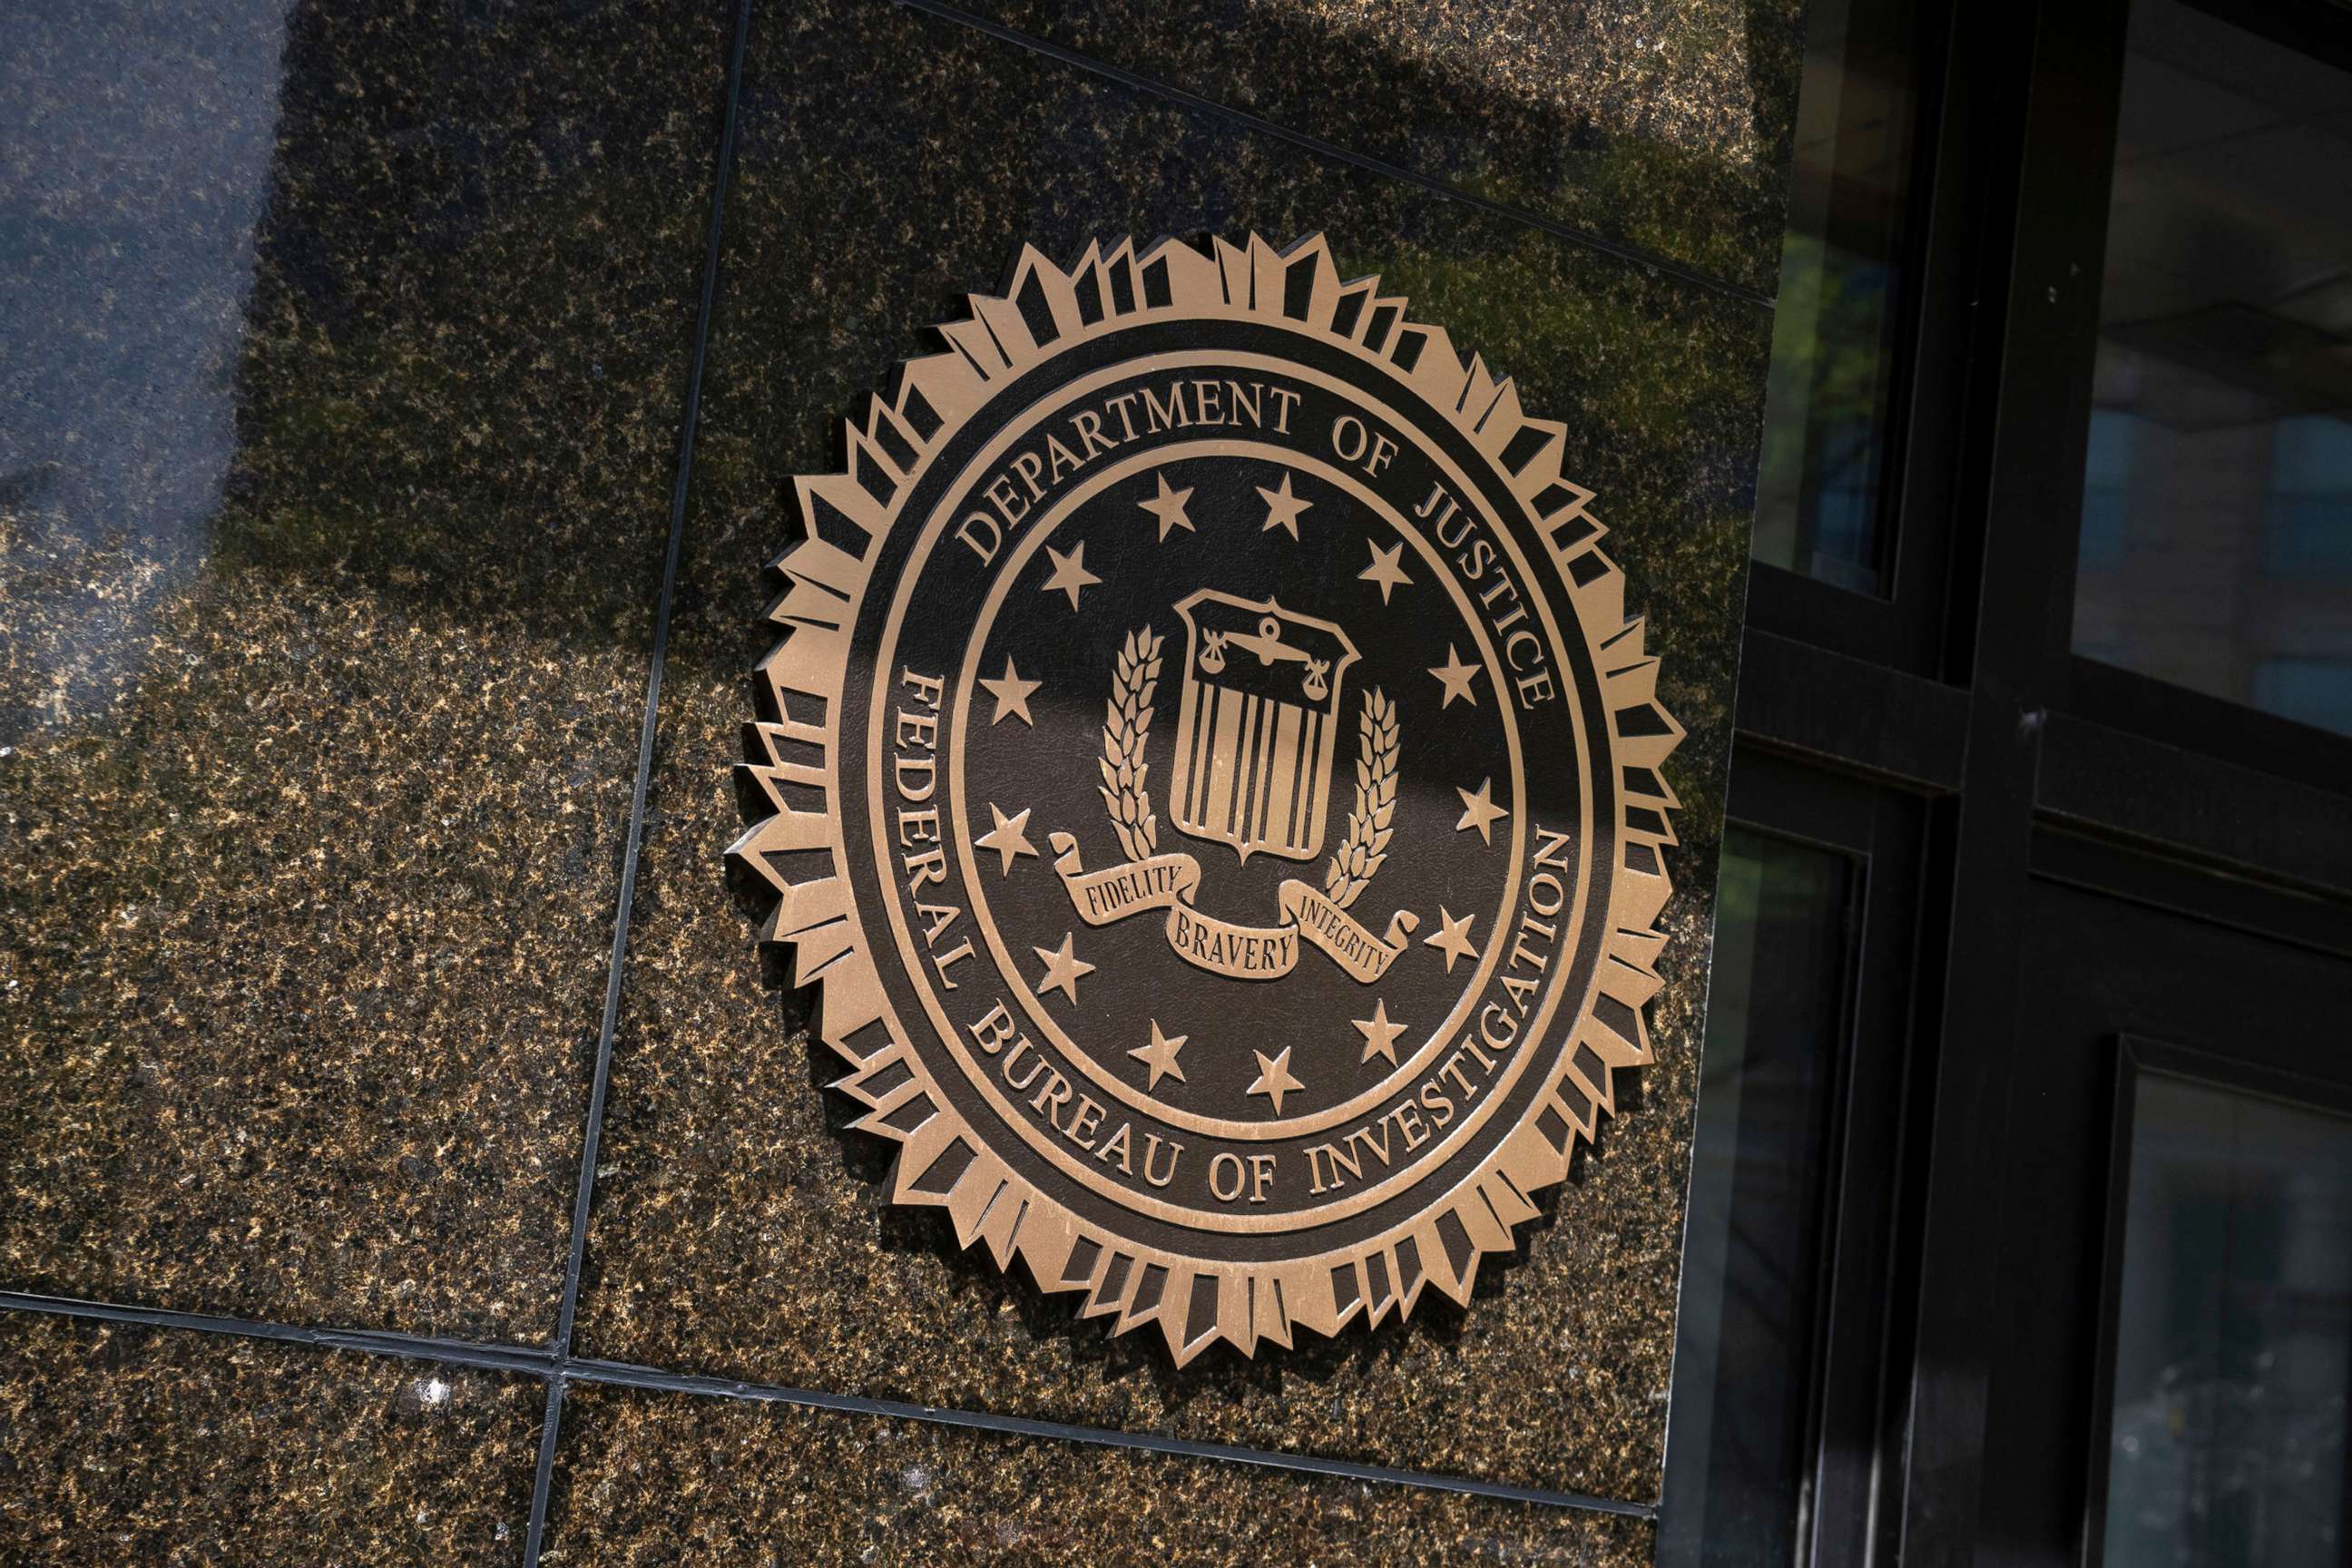 PHOTO: In this April 22, 2022, file photo, the Federal Bureau of Investigation seal is shown at the J. Edgar Hoover building in Washington, D.C.